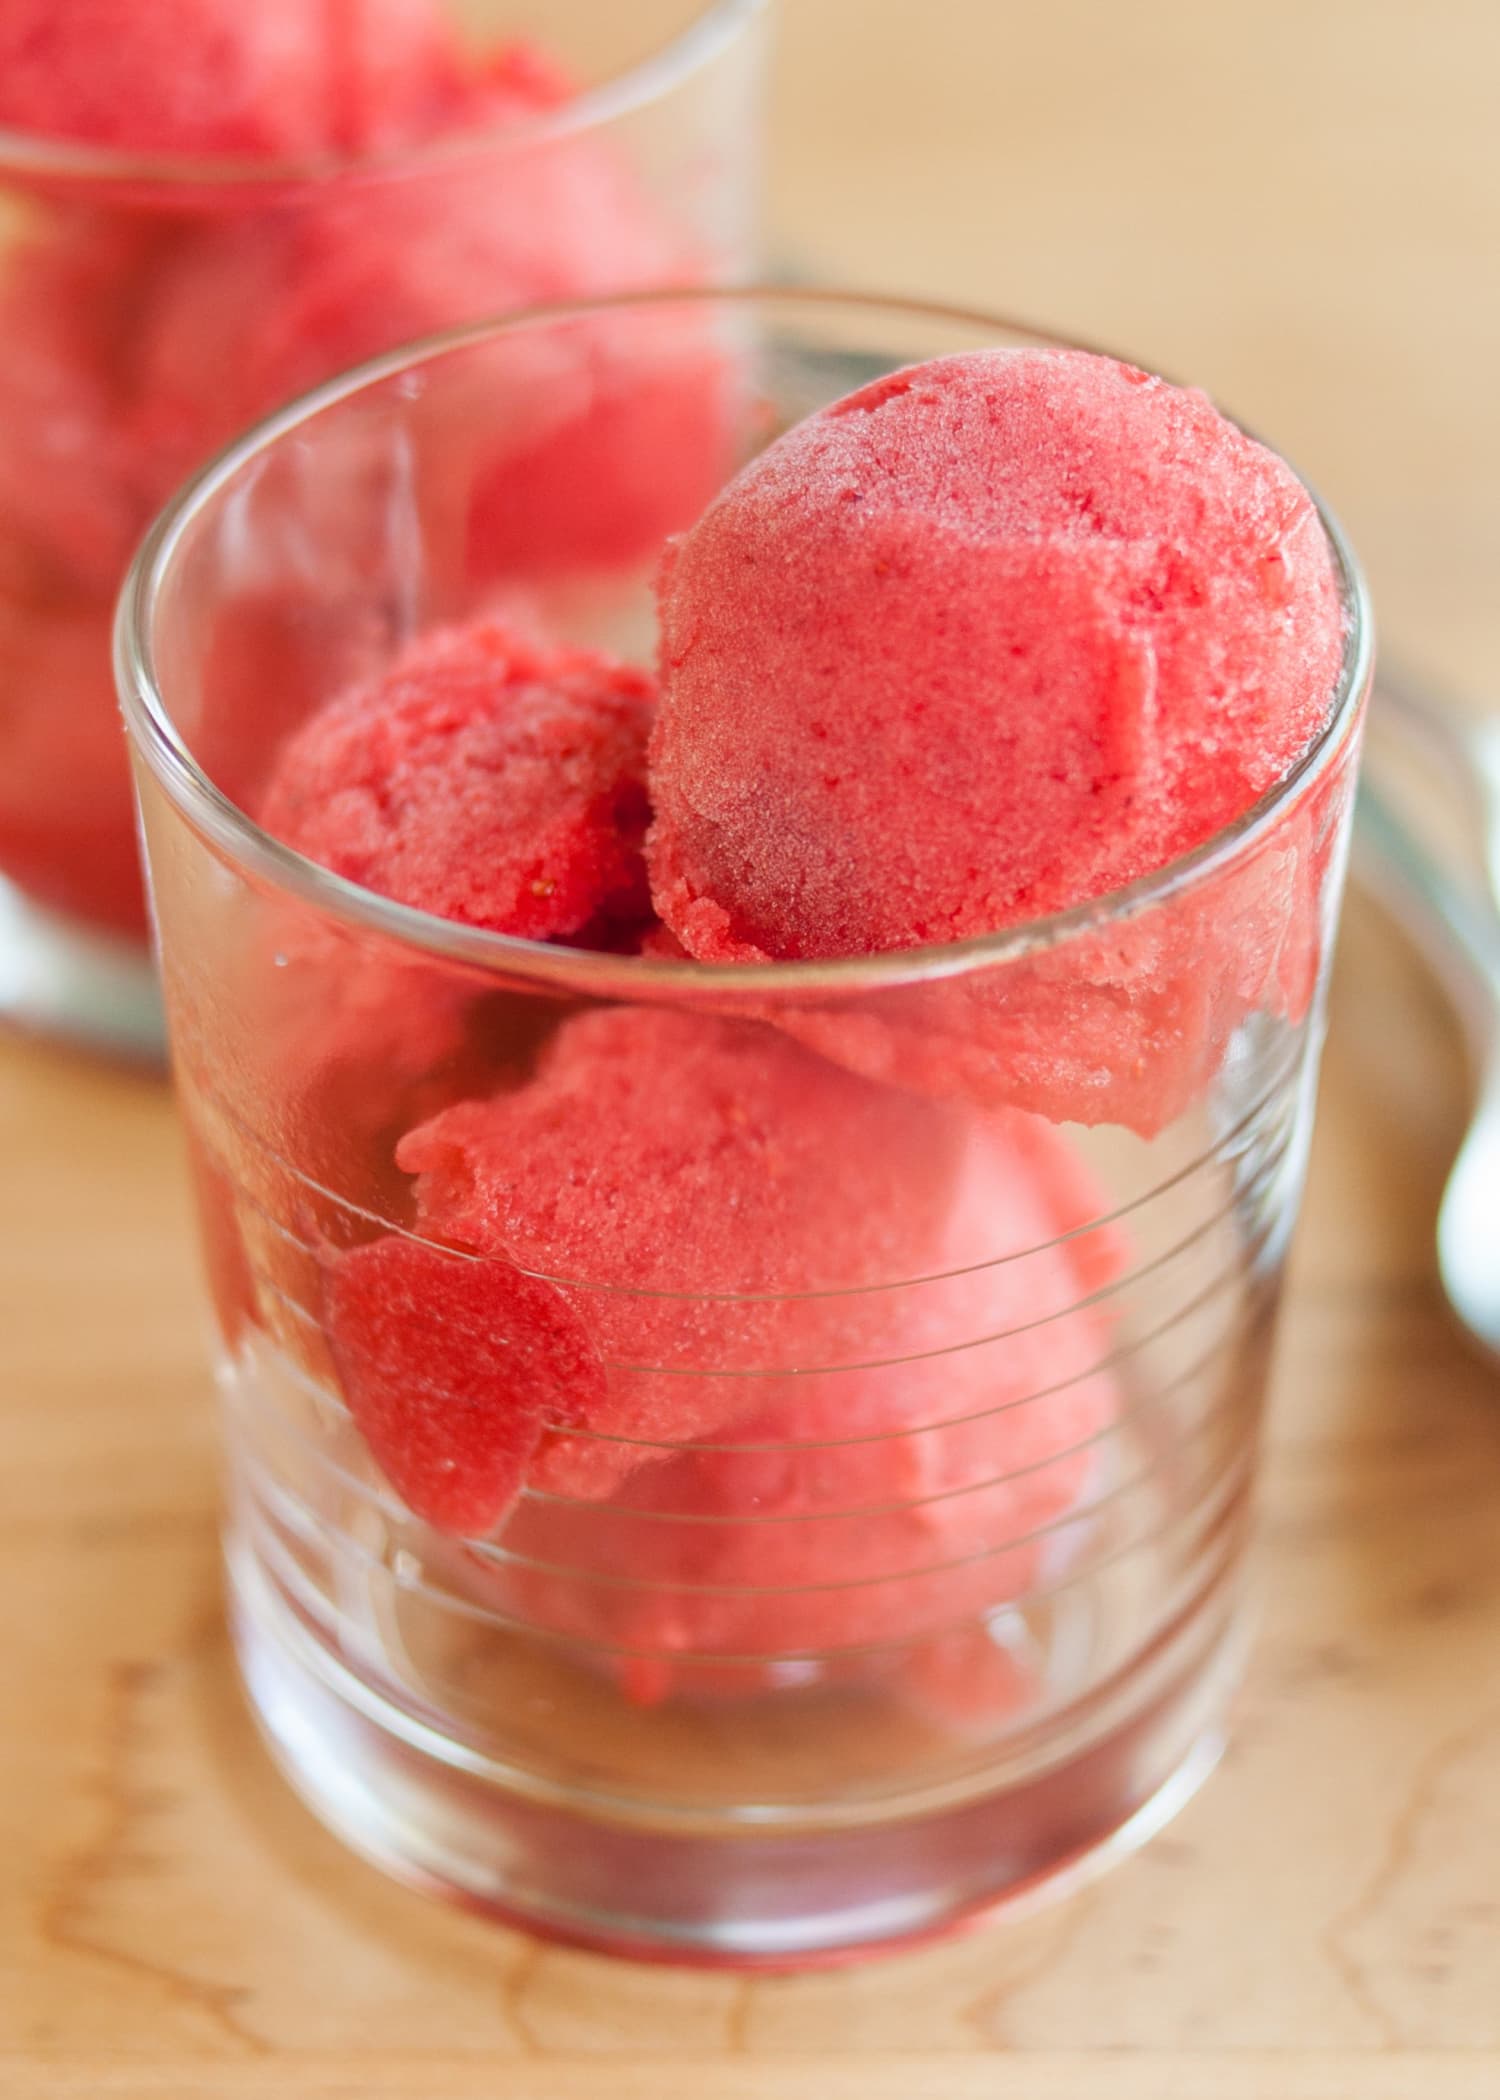 How To Make Sorbet with Any Fruit | Kitchn